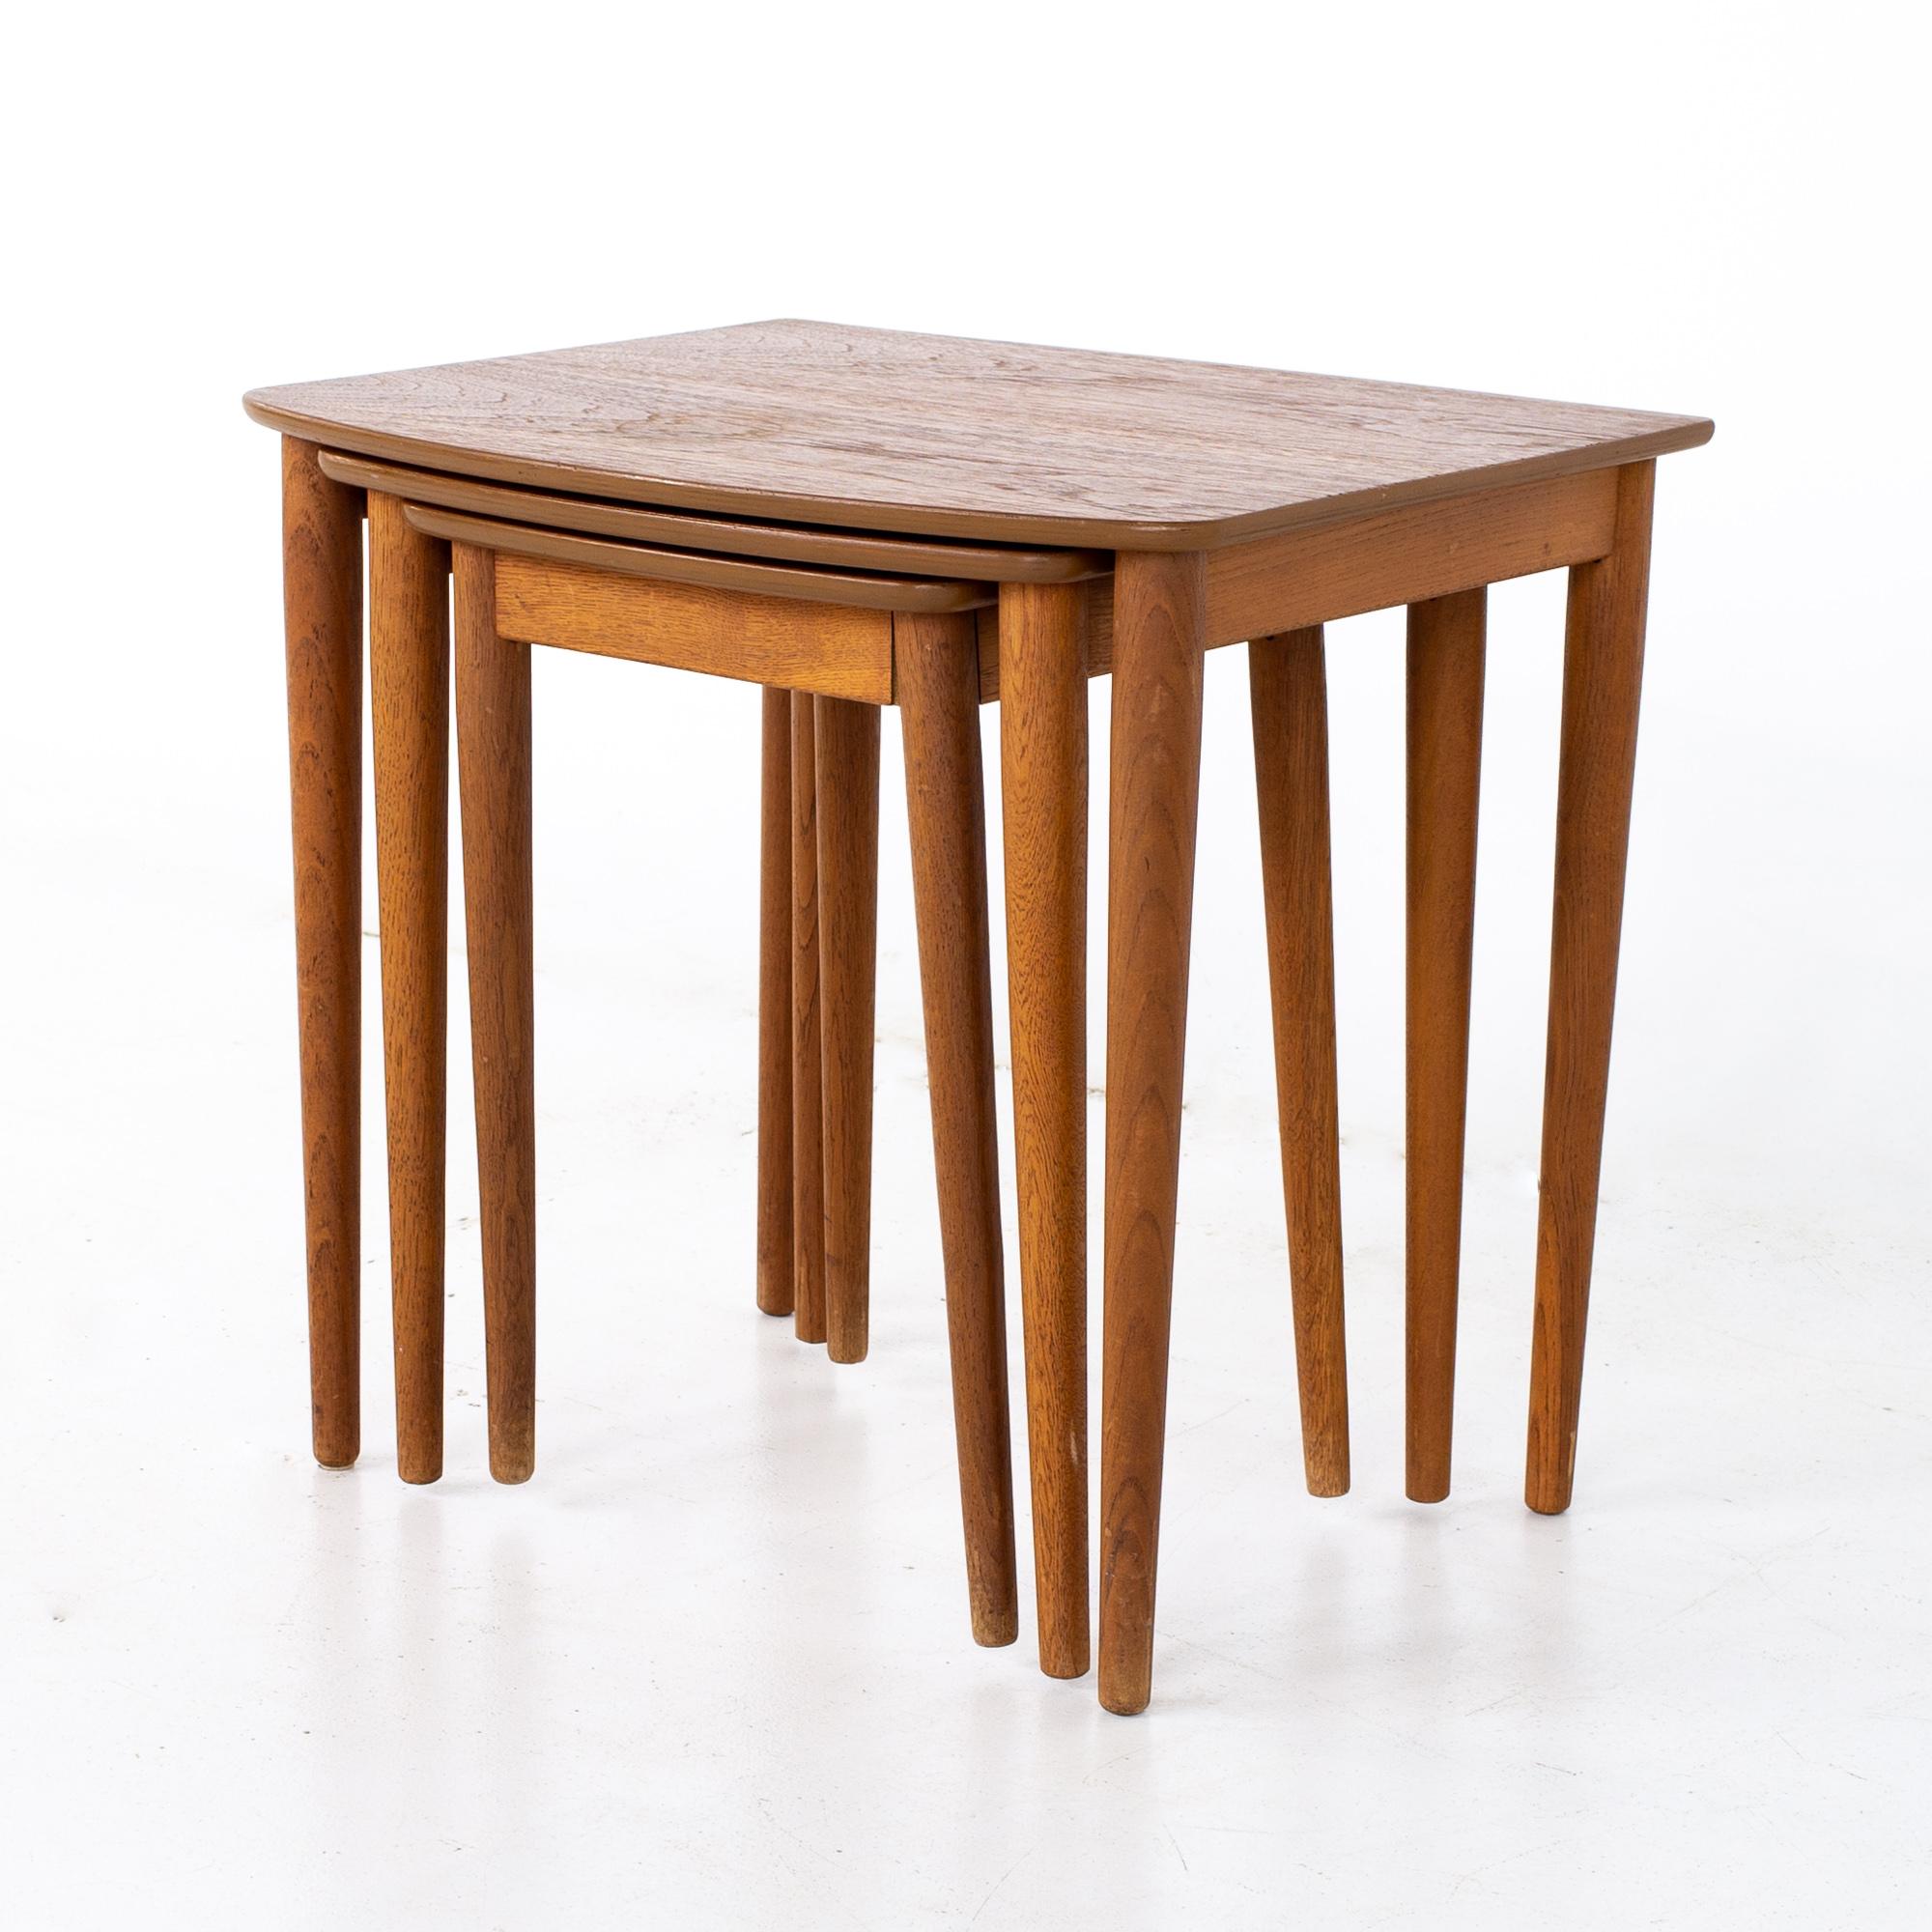 Mid century Danish teak bow front nesting tables
Largest table measures: 20.5 wide x 16 deep x 19 inches high
Middle table measures: 16 wide x 14 deep x 18 inches high
Small table measures: 12 wide x 12 deep x 17 inches high

All pieces of